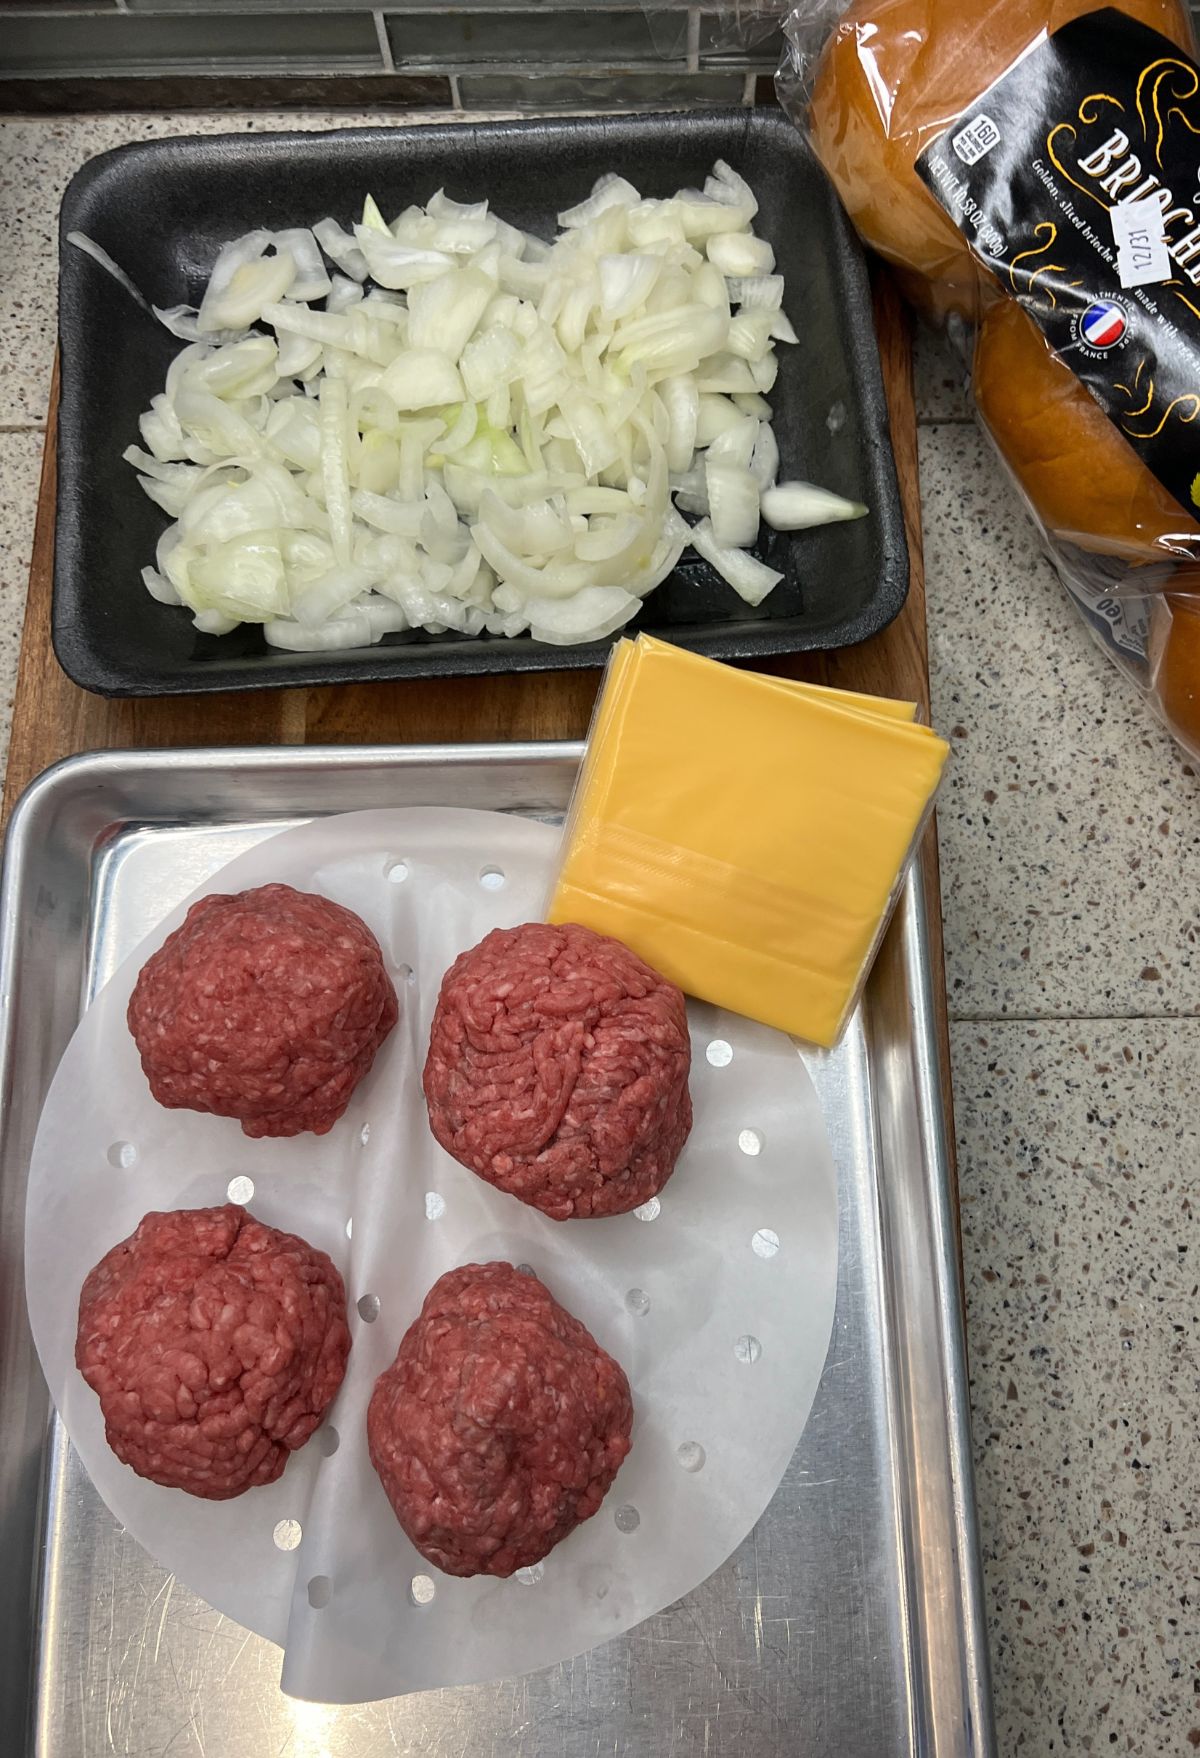 Meatballs with onions and cheese on a baking sheet.